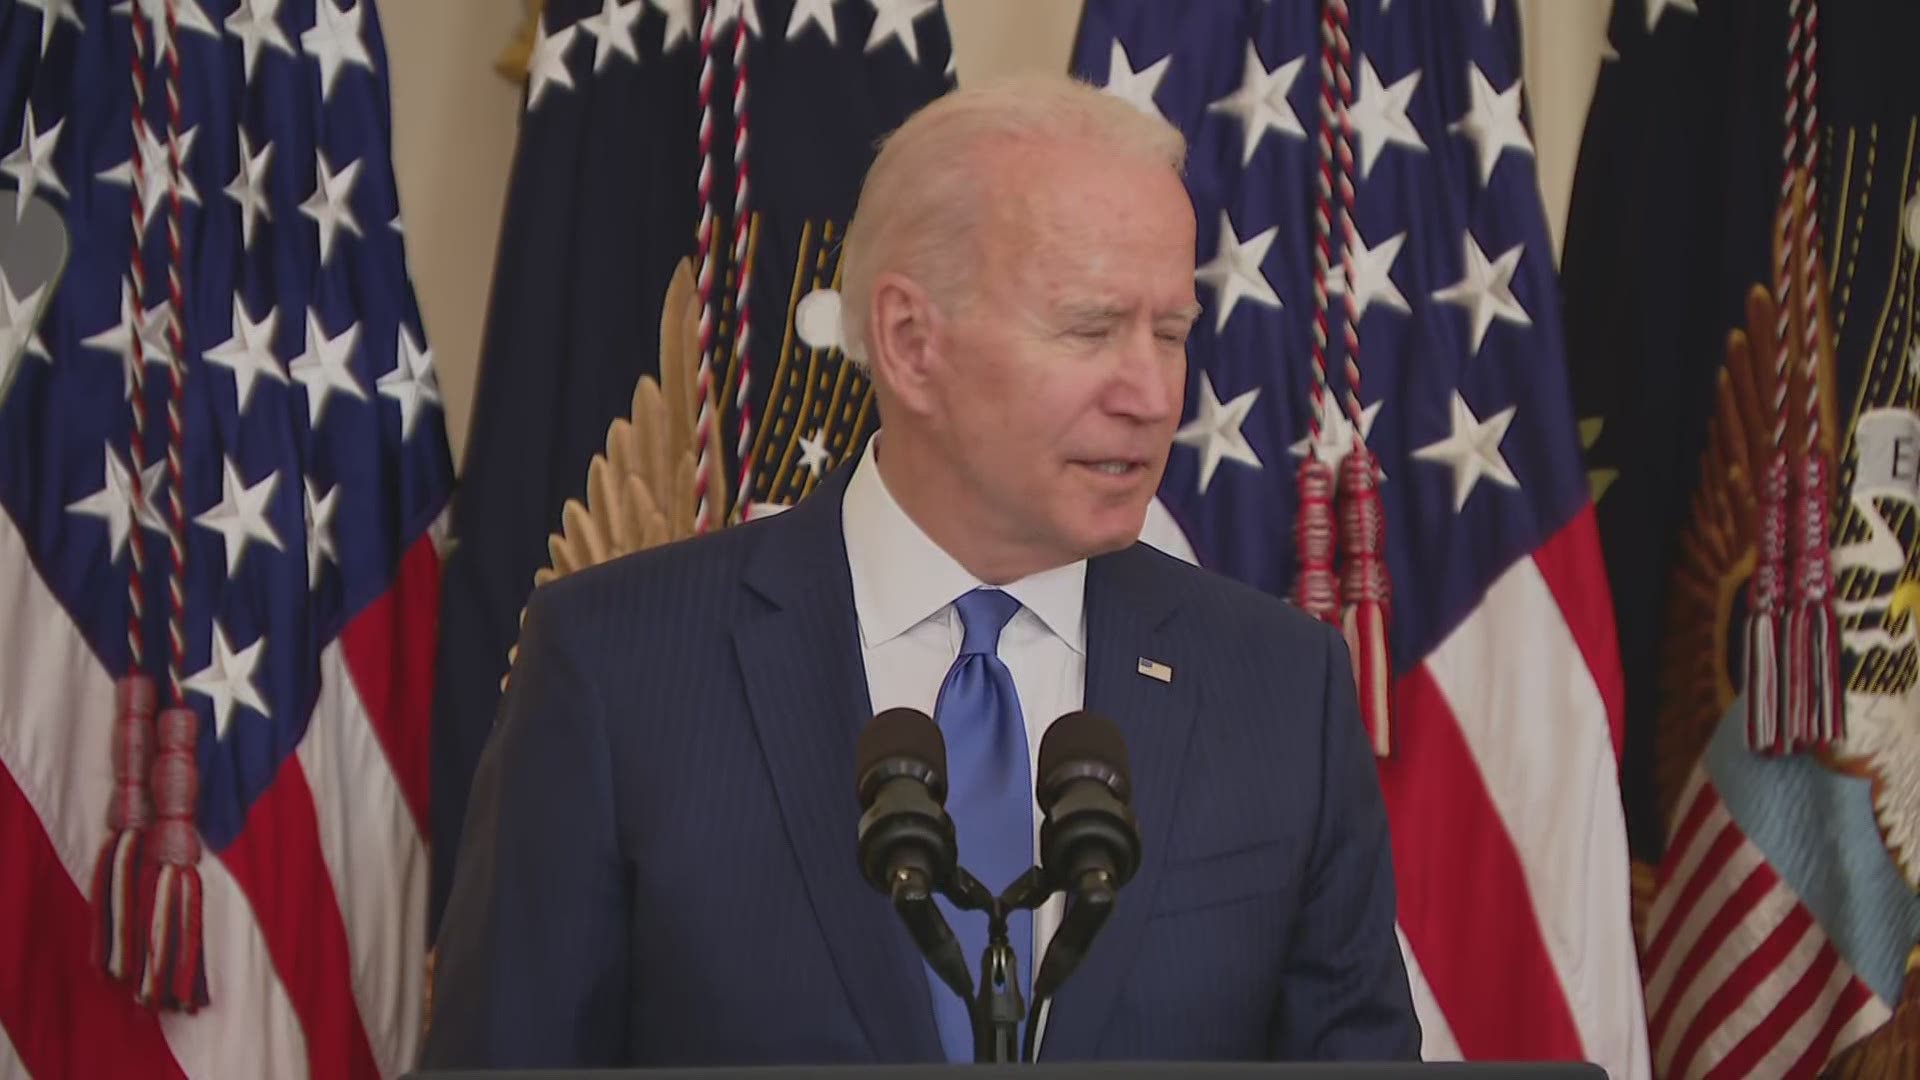 Biden gave remarks on the importance of Pride Month after signing a resolution making Pulse Nighclub a national memorial.